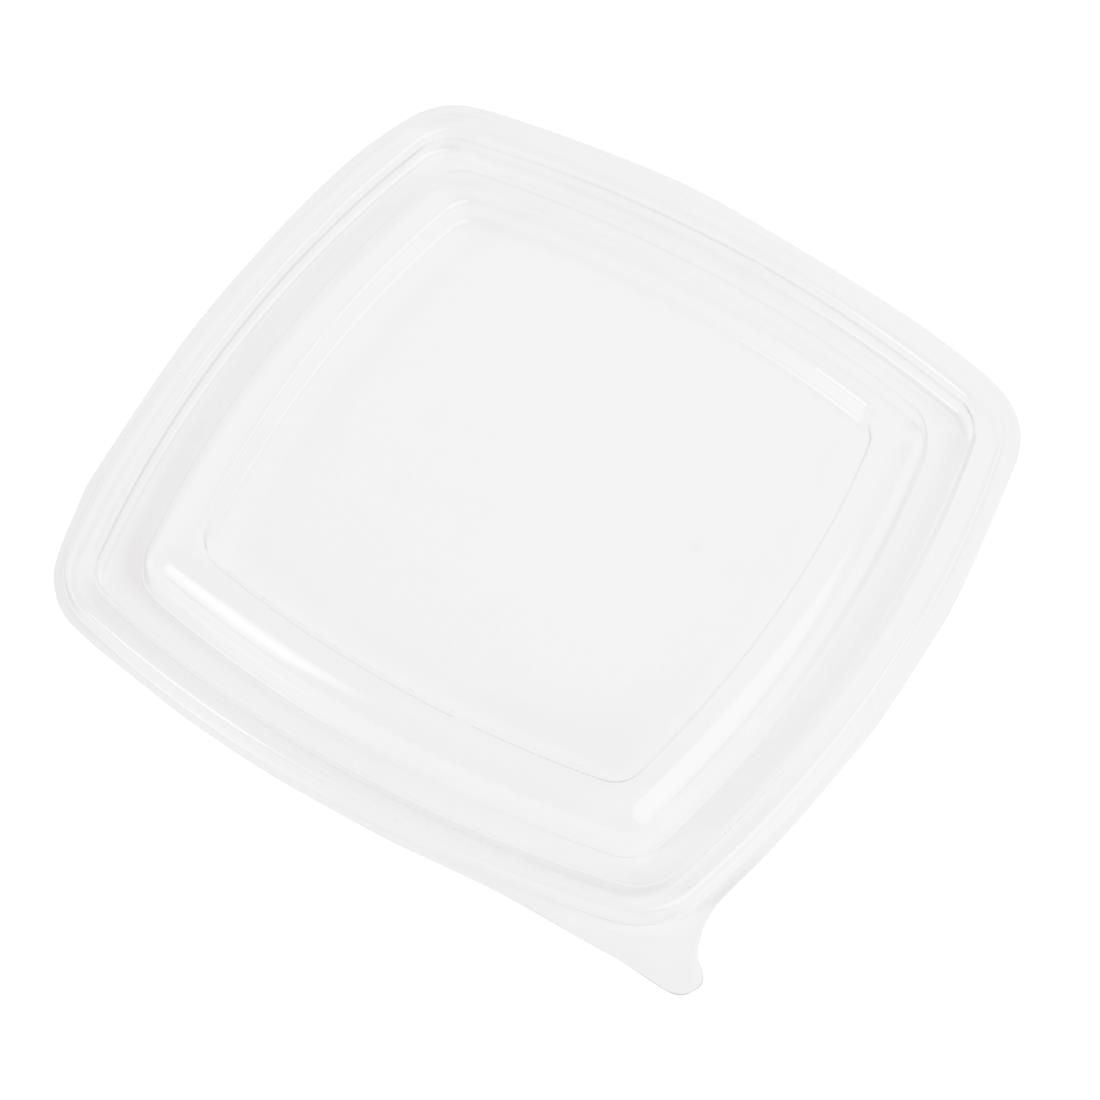 Faerch Plaza Recyclable Deli Container Lids 375ml / 13oz (Pack of 600) JD Catering Equipment Solutions Ltd